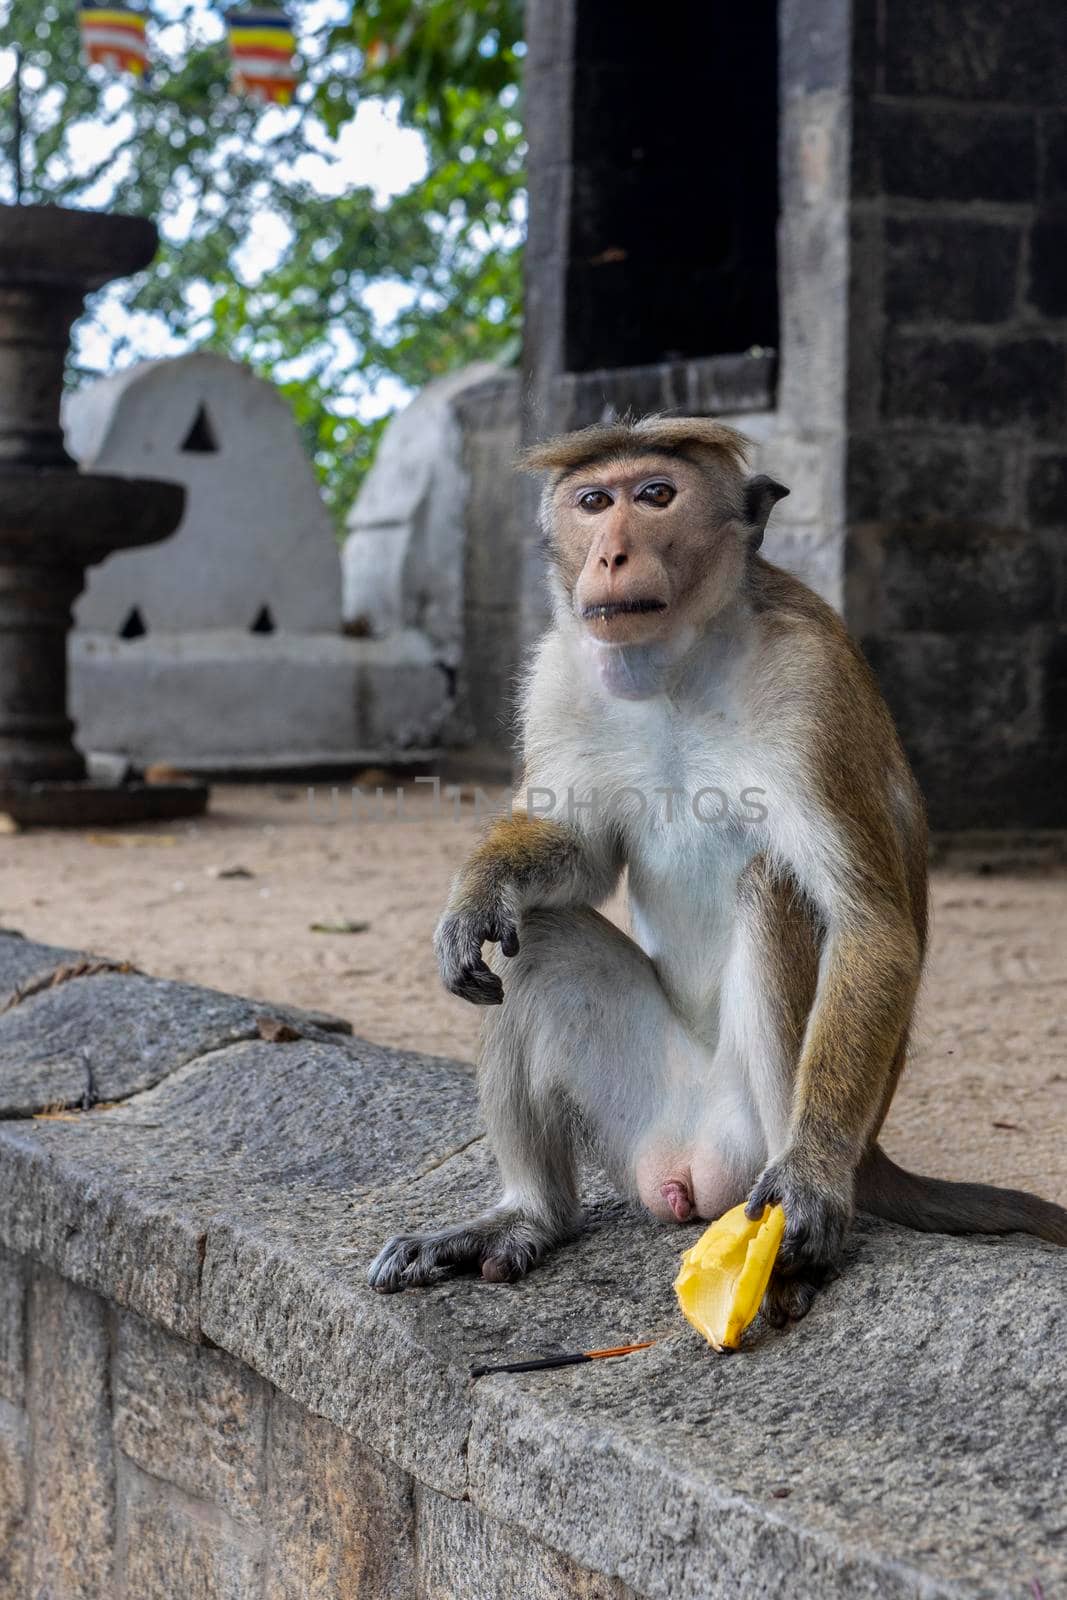 Sri Lanka. A cute monkey sits on a fence with a banana in his hand in a cave Buddhist temple in Dambulla. by usphoto